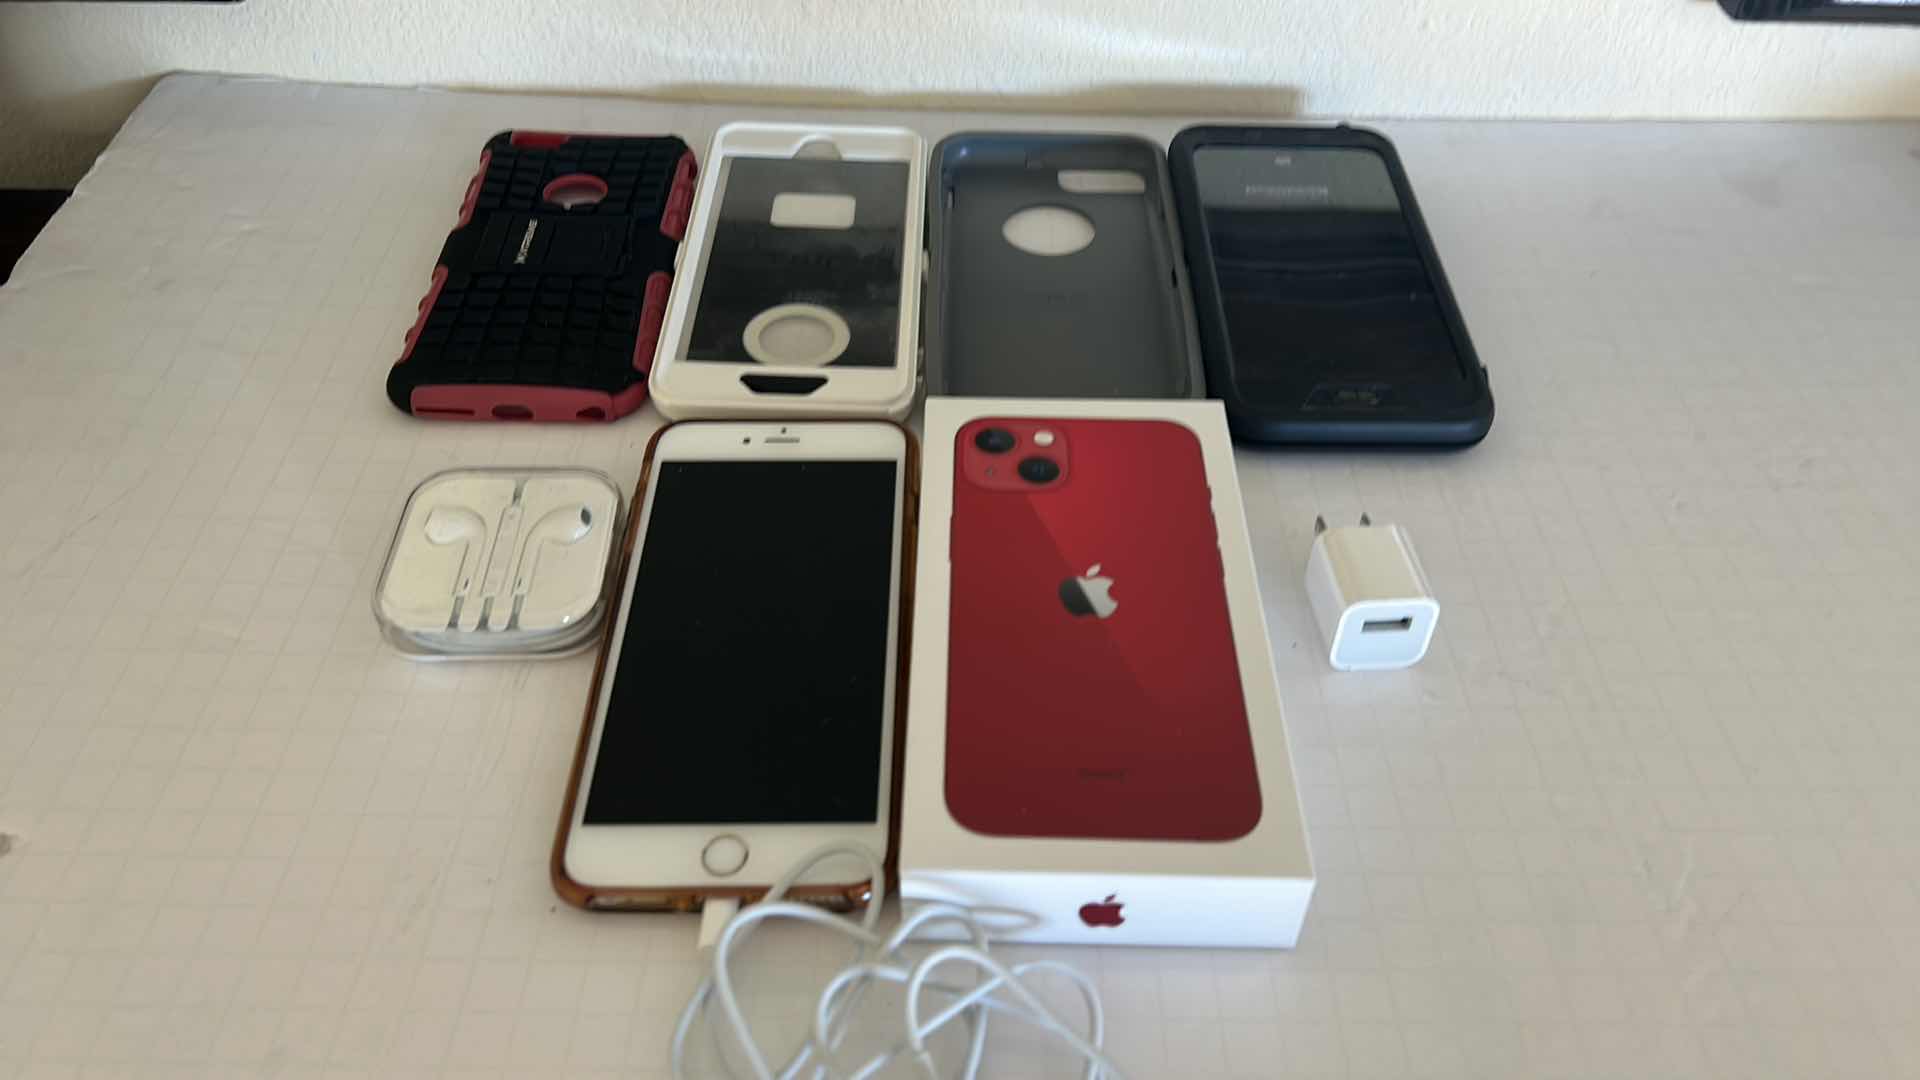 Photo 5 of iPHONE AND ACCESSORIES